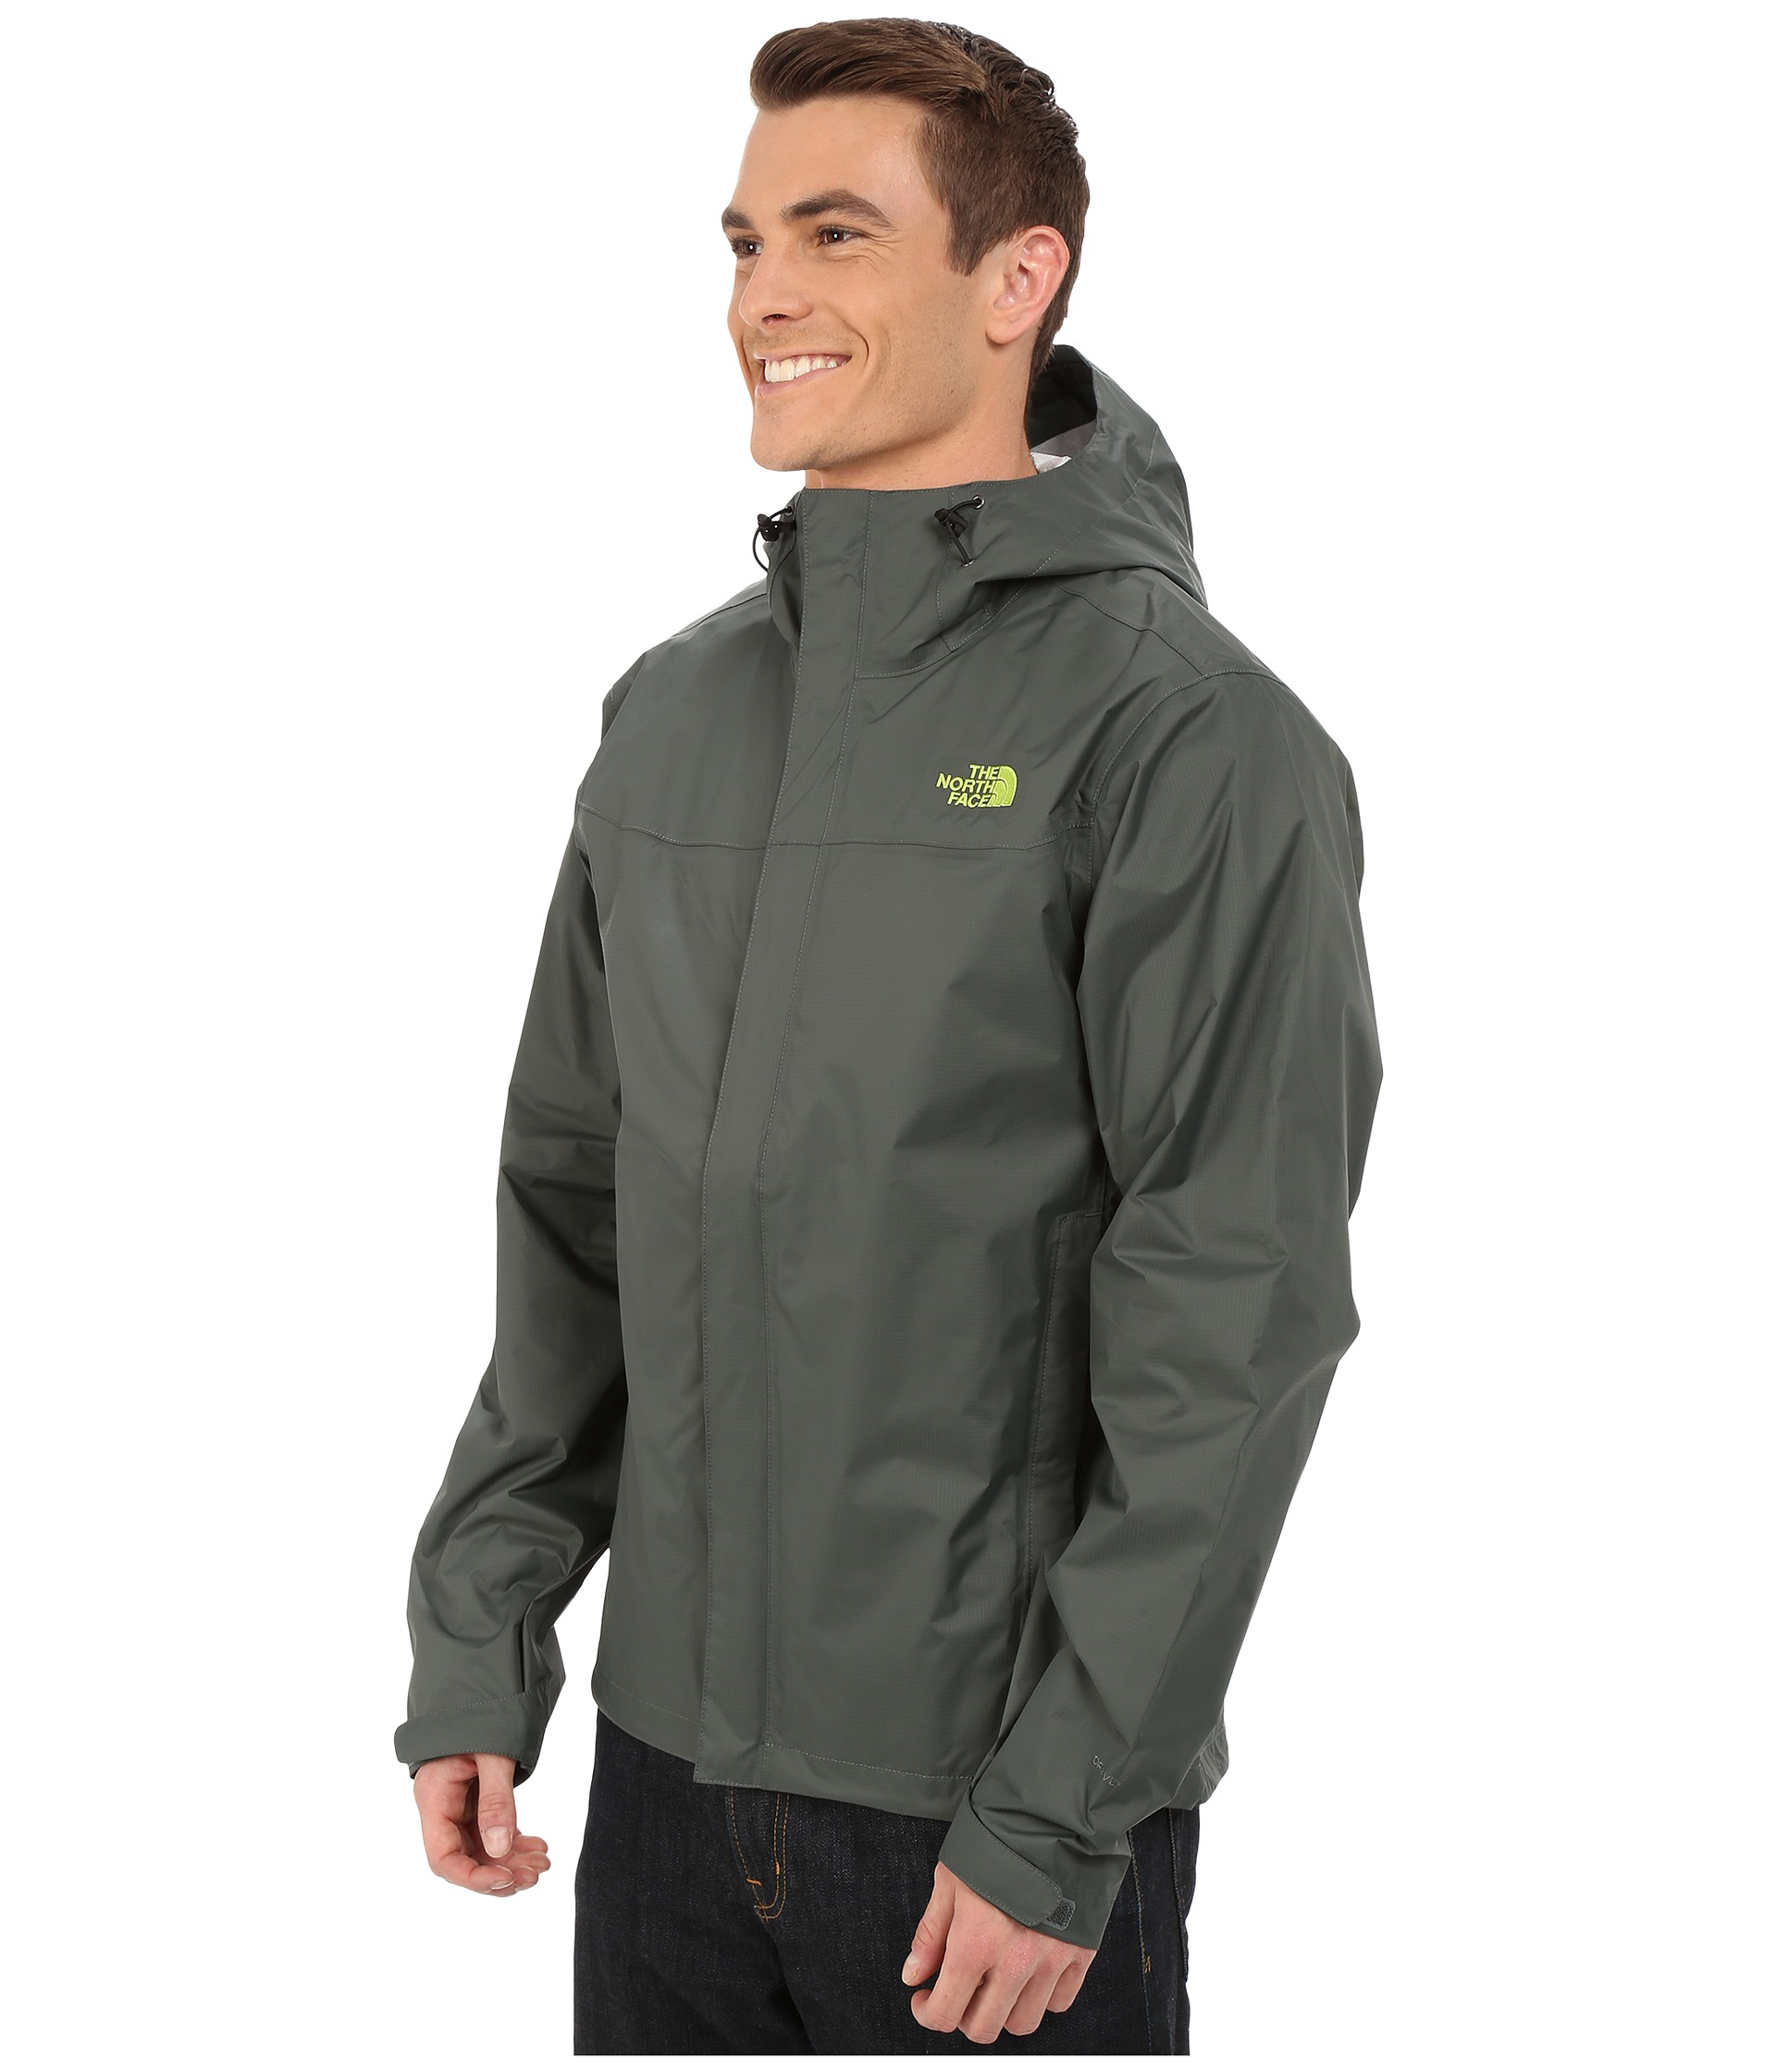 Lyst - The North Face Venture Jacket in Green for Men